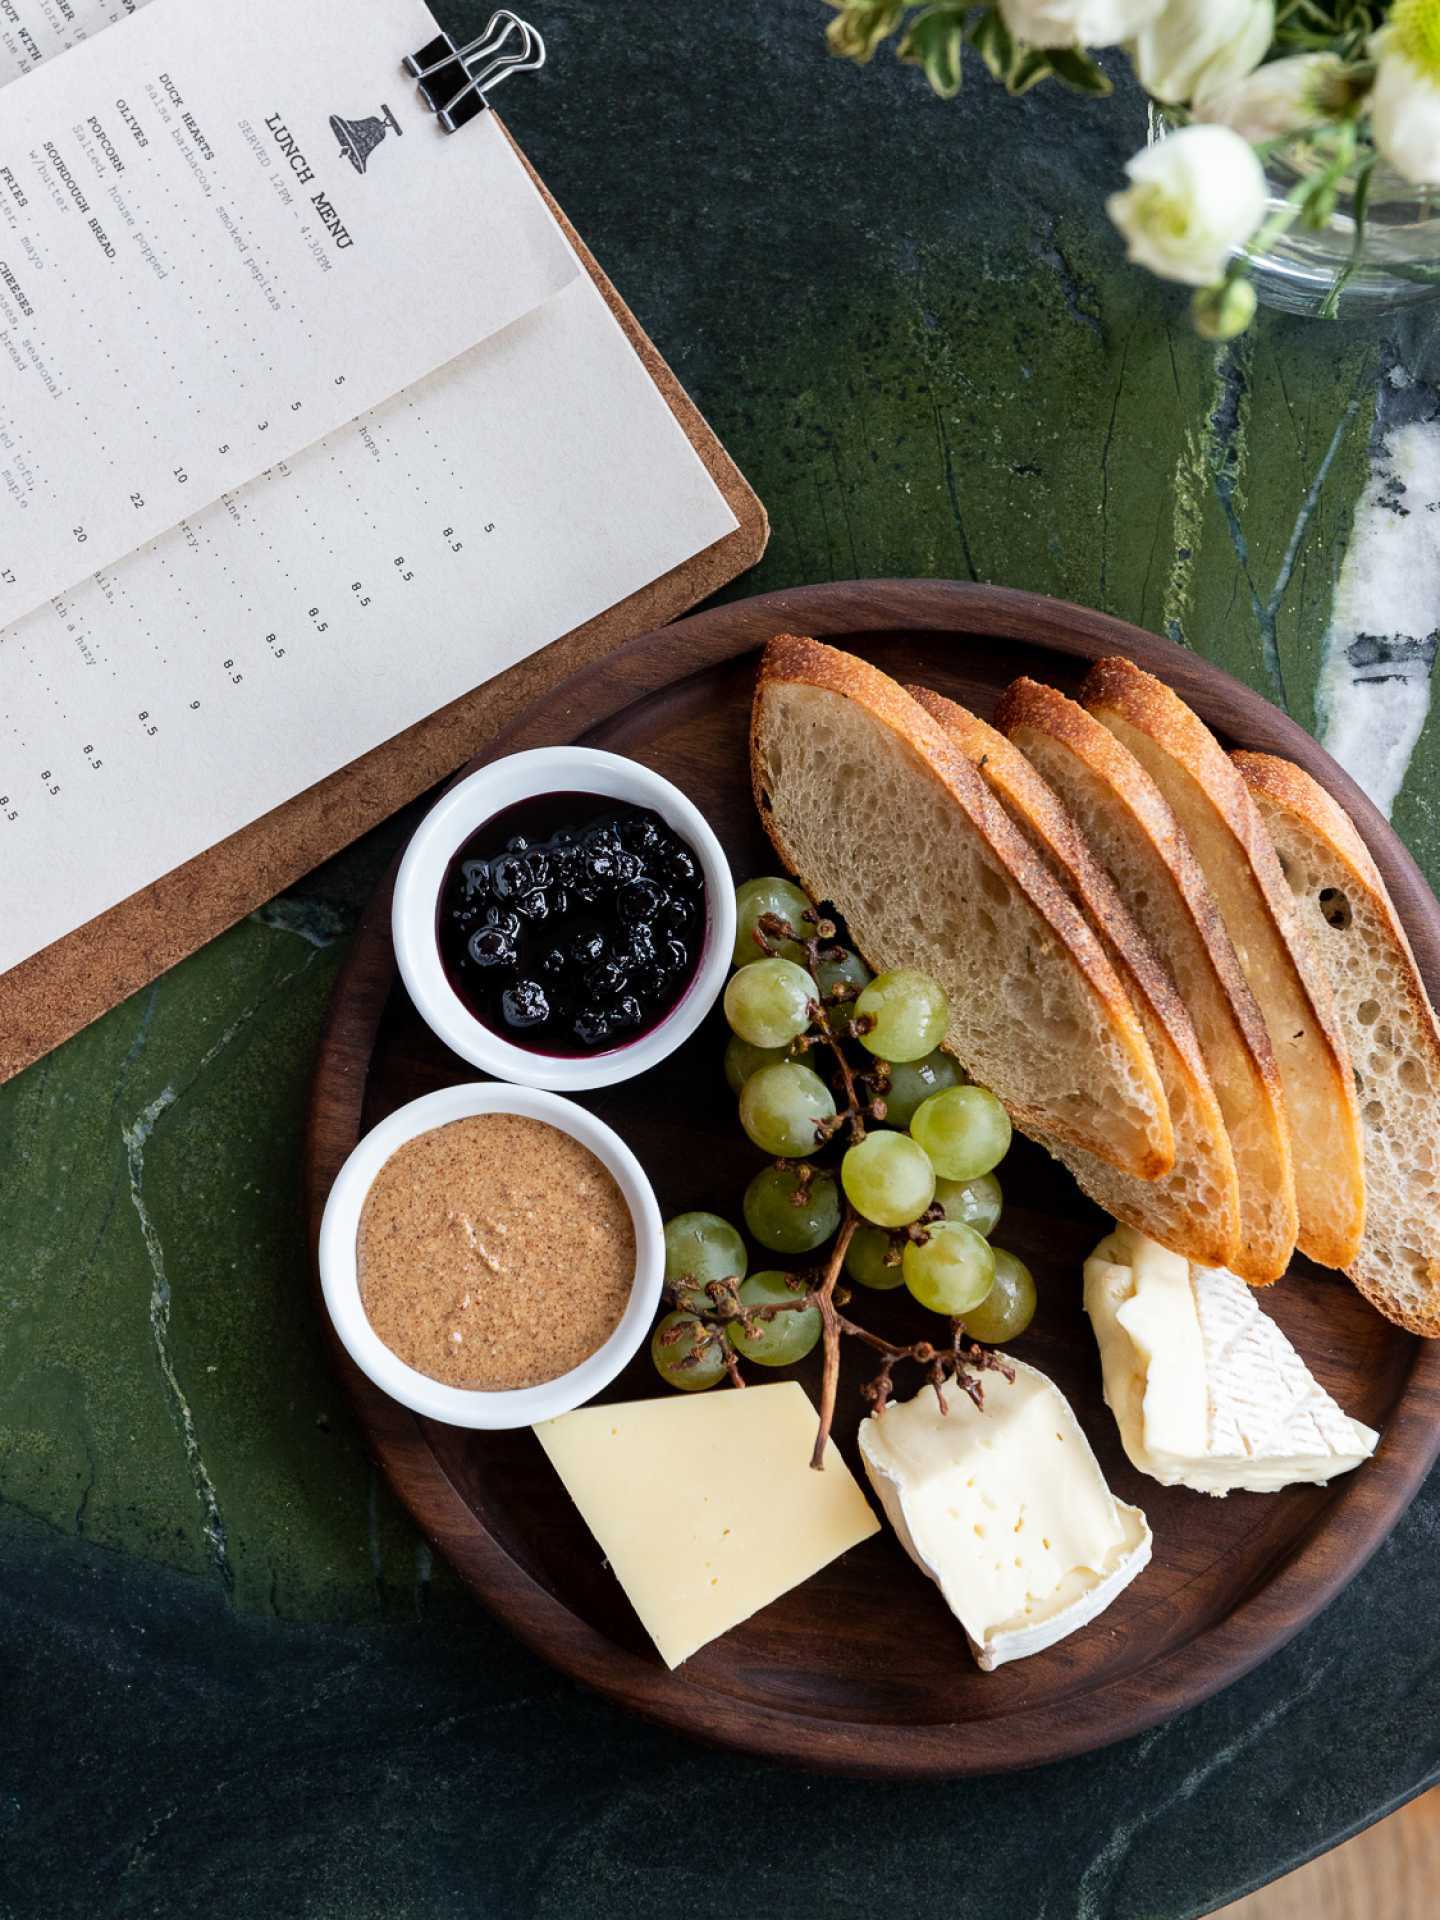 Toronto breweries | Chicken liver mousse at Bellwoods Brewery